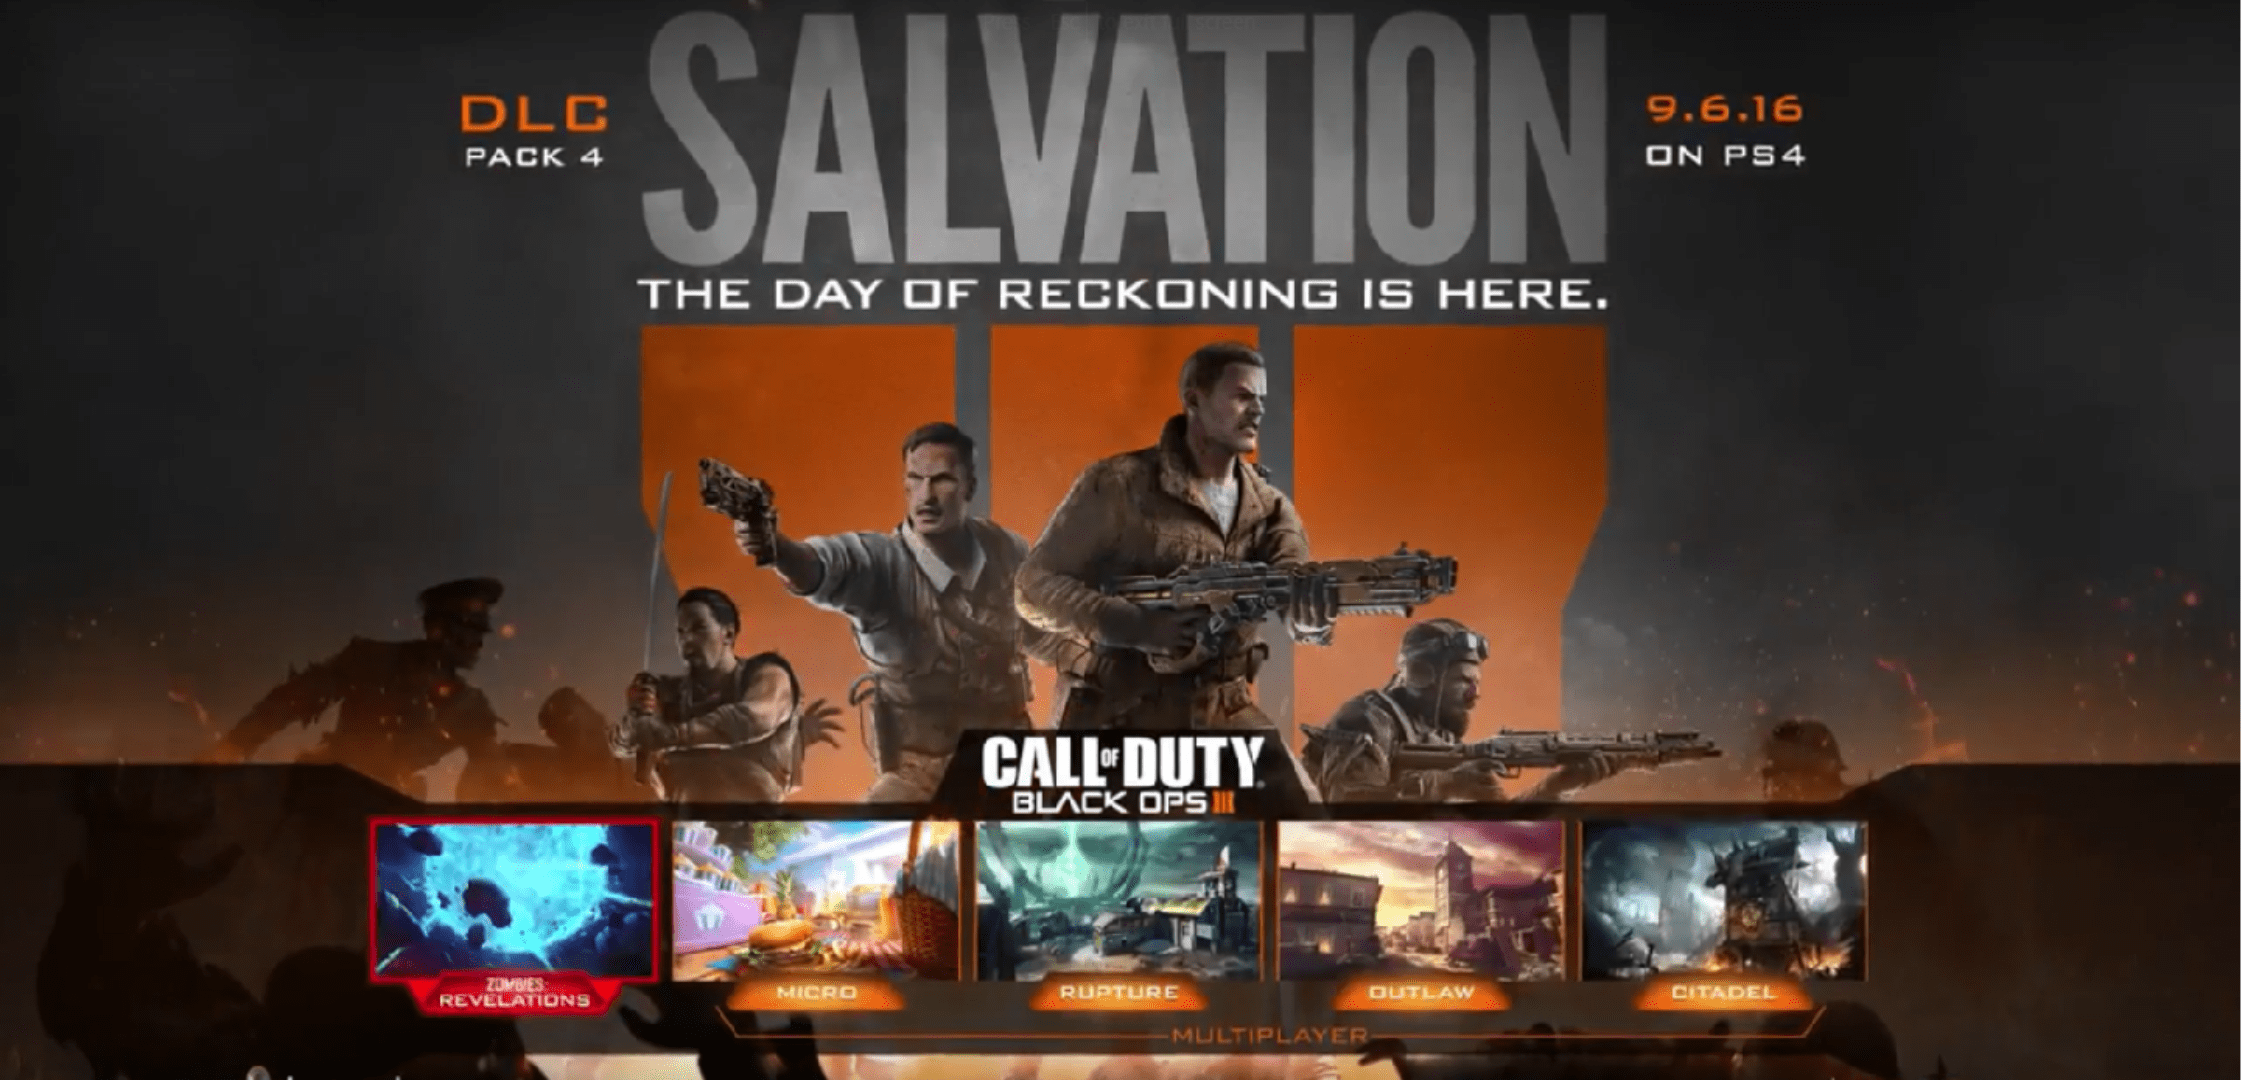 Call of Duty Black Ops 3 Salvation DLC Announced